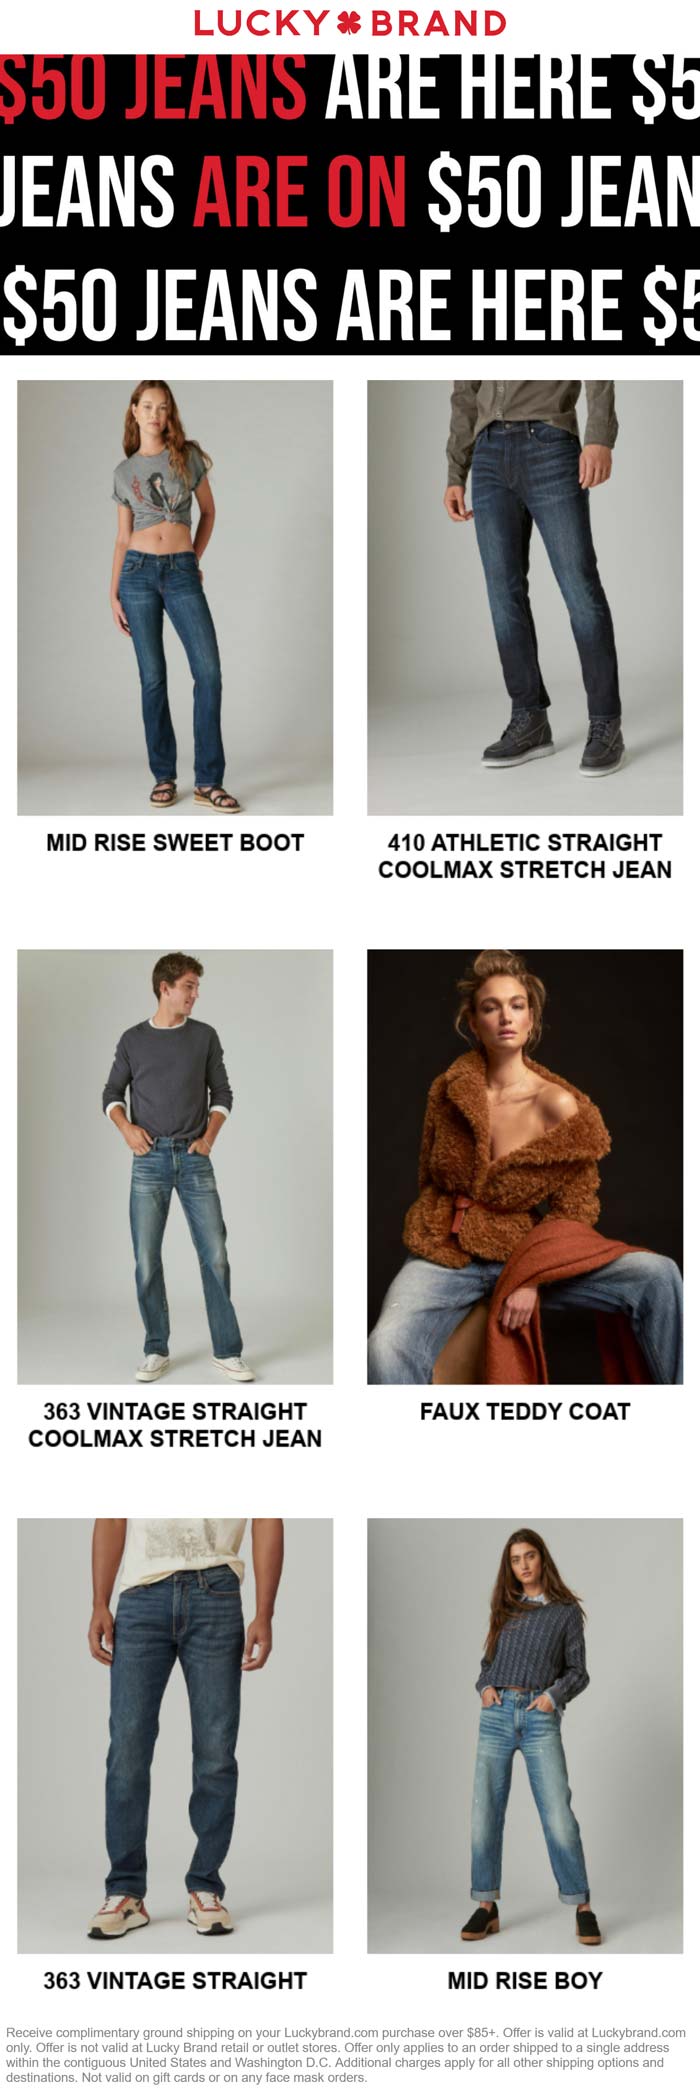 Various jeans for $50 going on at Lucky Brand #luckybrand